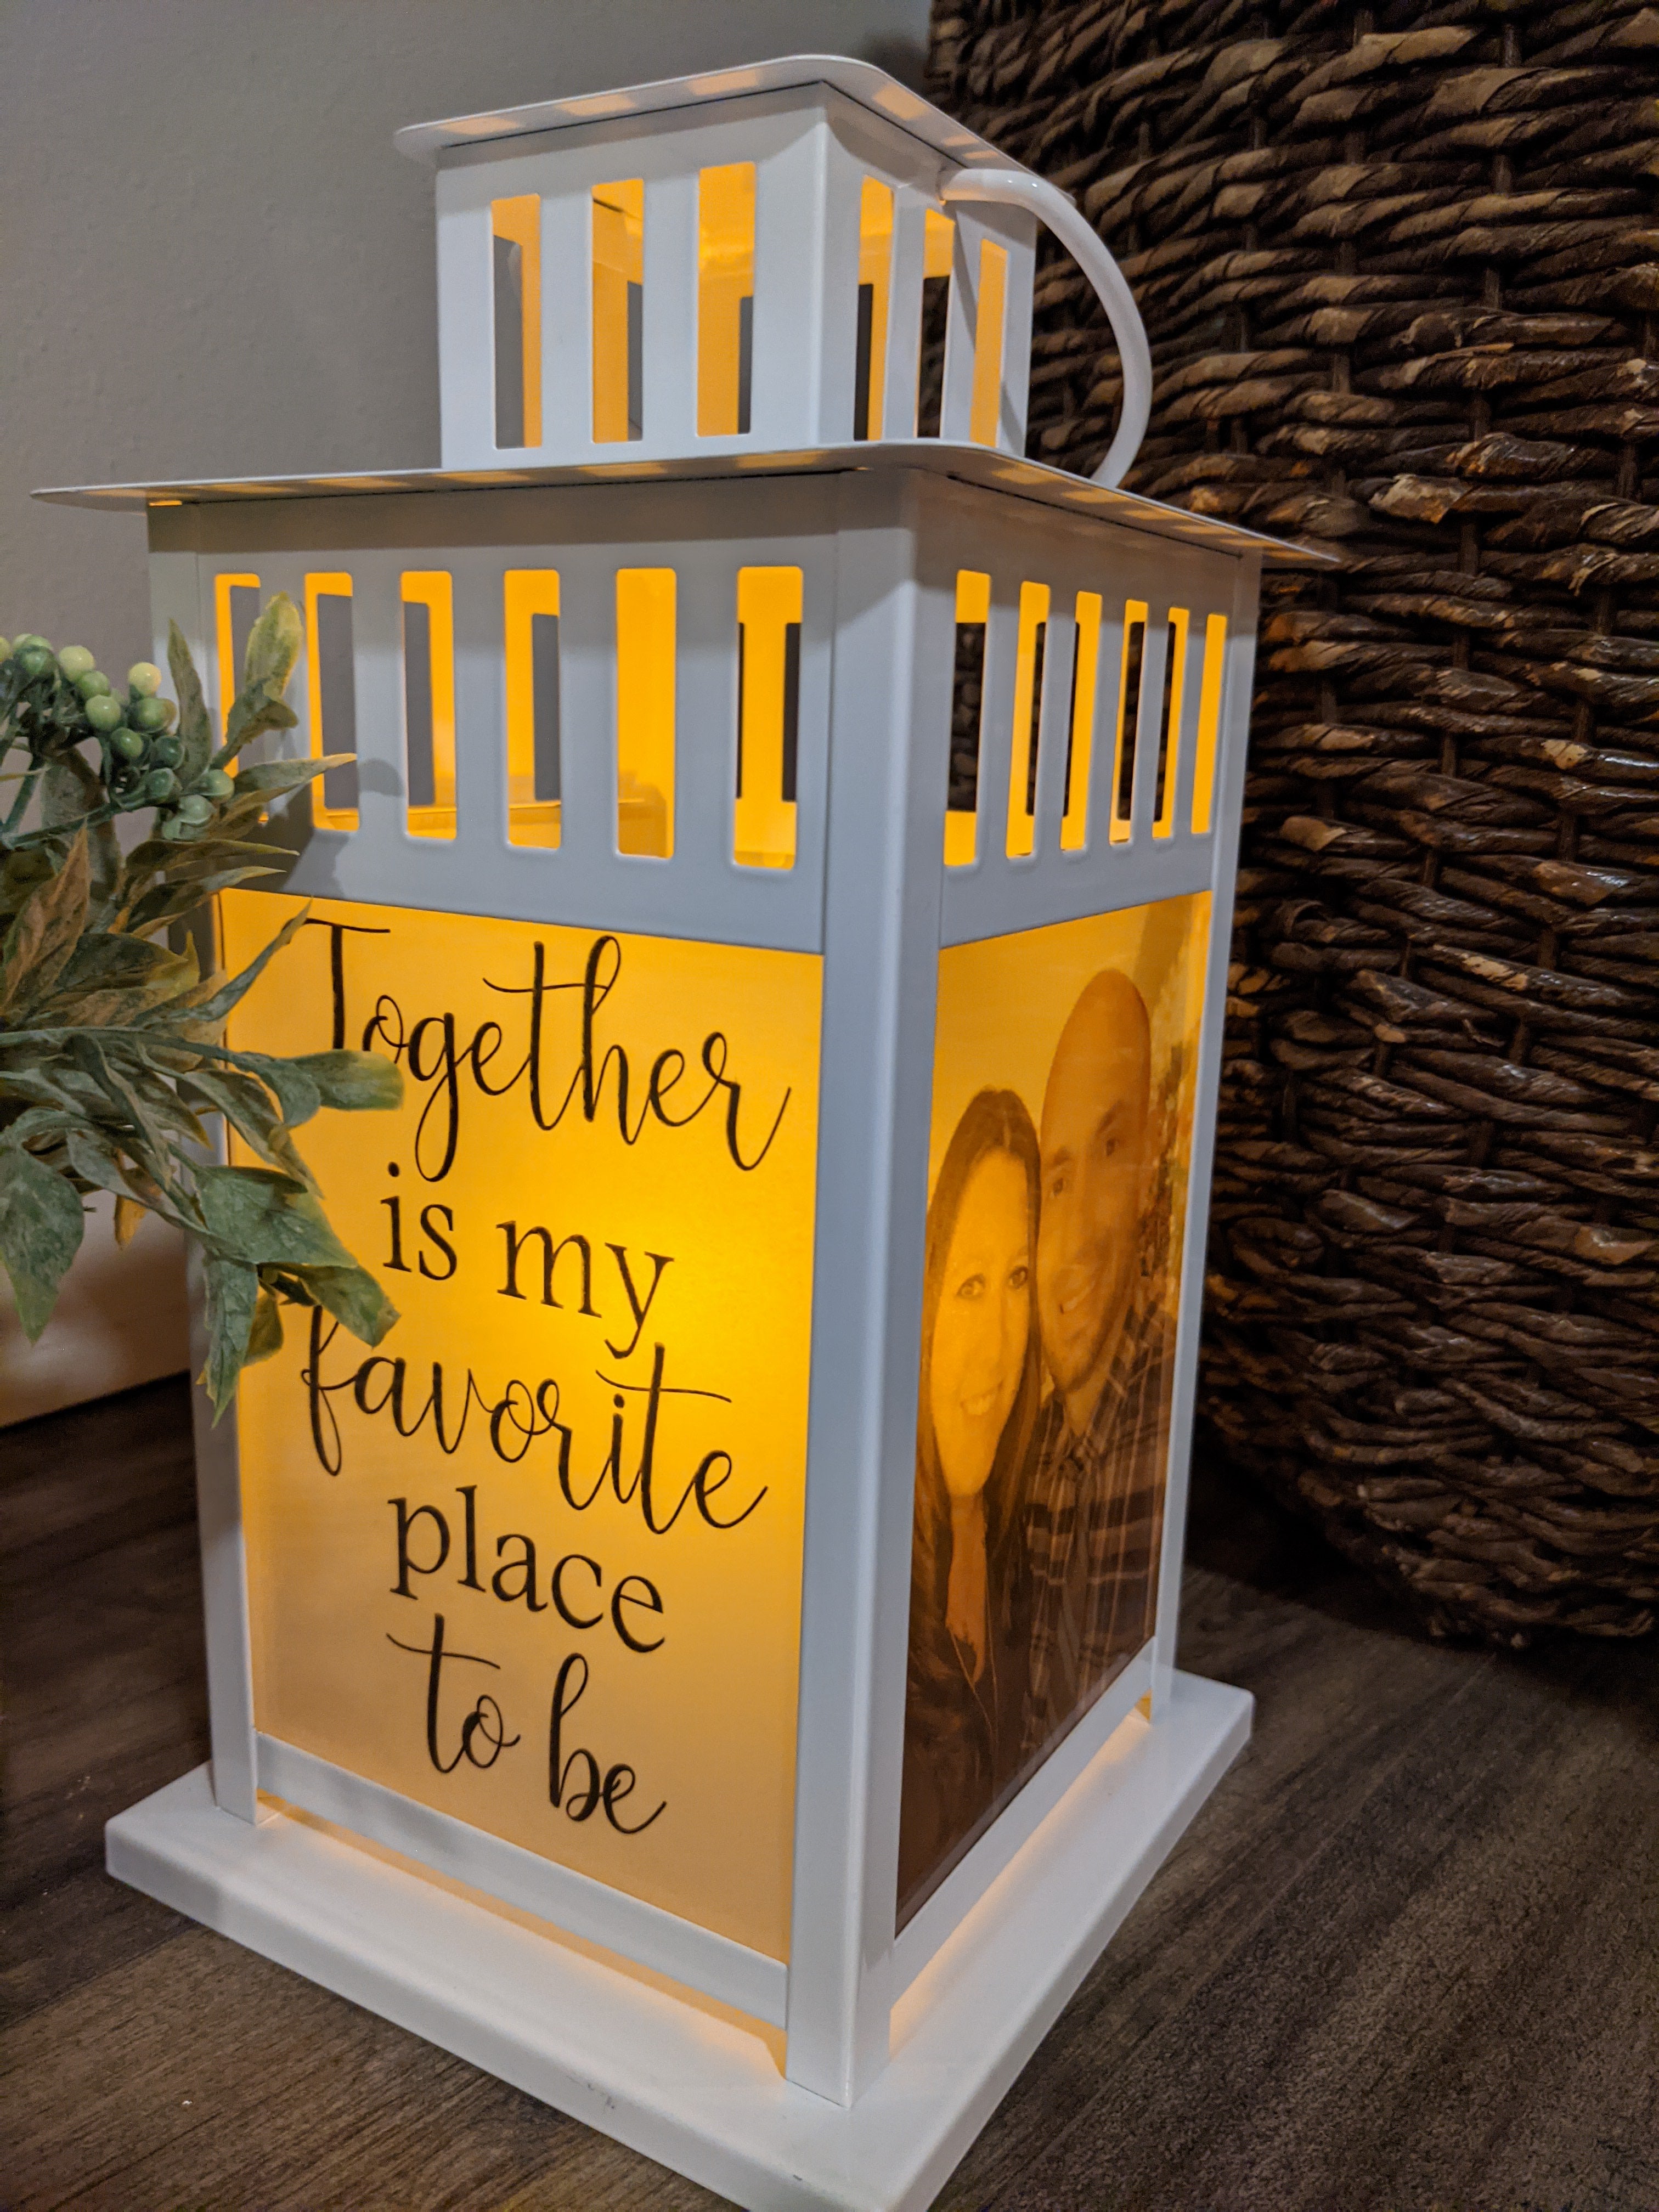 You are my Everything Love Lantern - Multiple Options - Personalized with your photos - Wedding Gift - Anniversary-The Dandelion Design Co